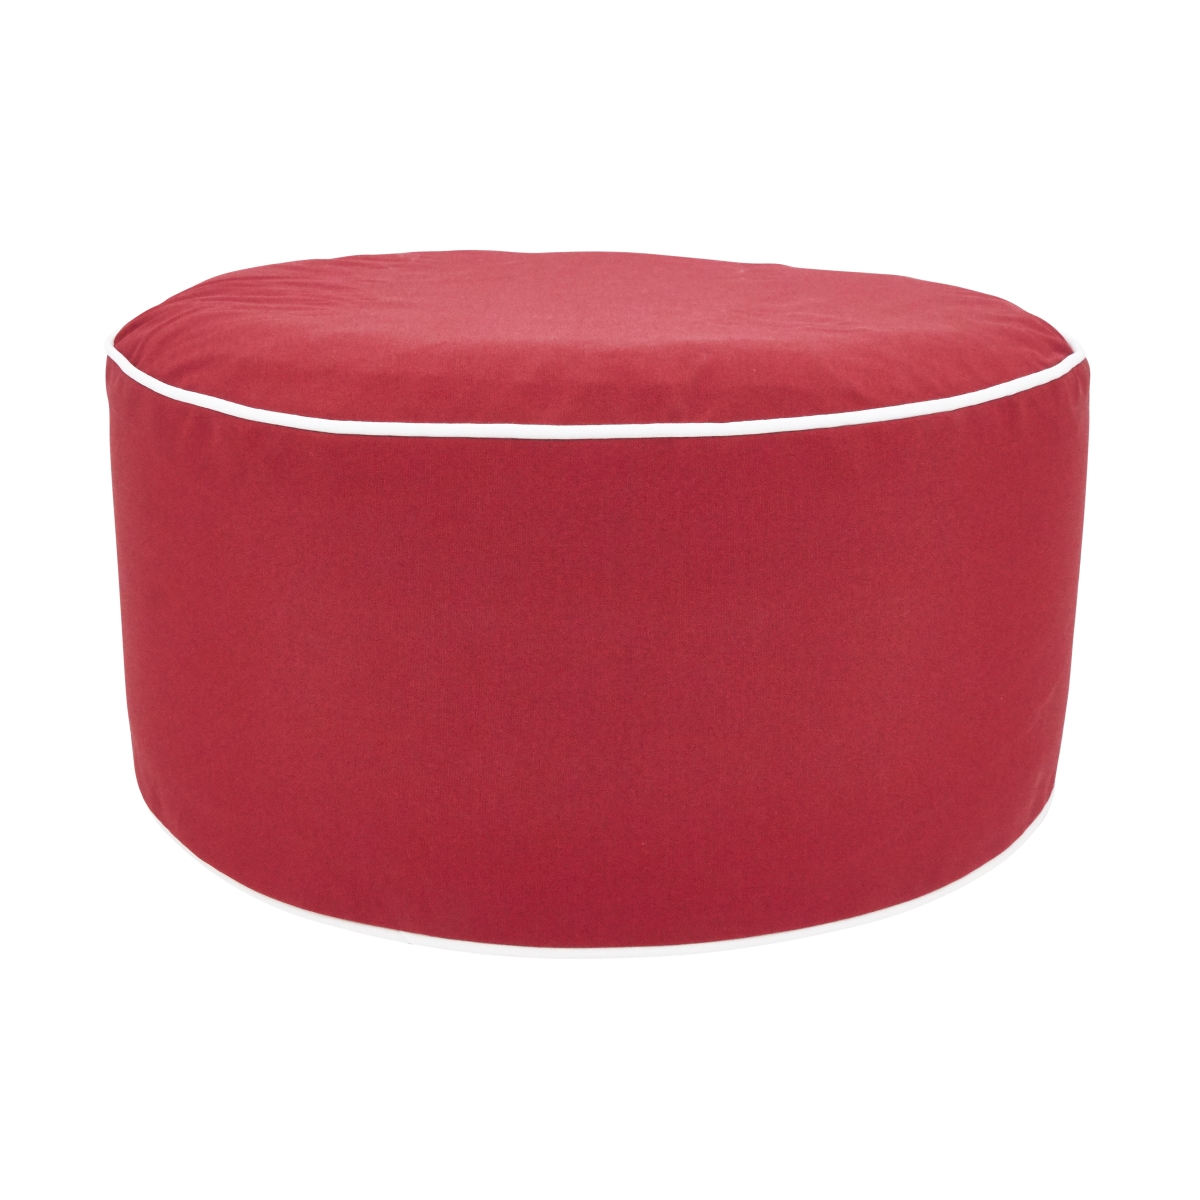 Pu906.r Simply Solid Inflatable Ottoman, Red